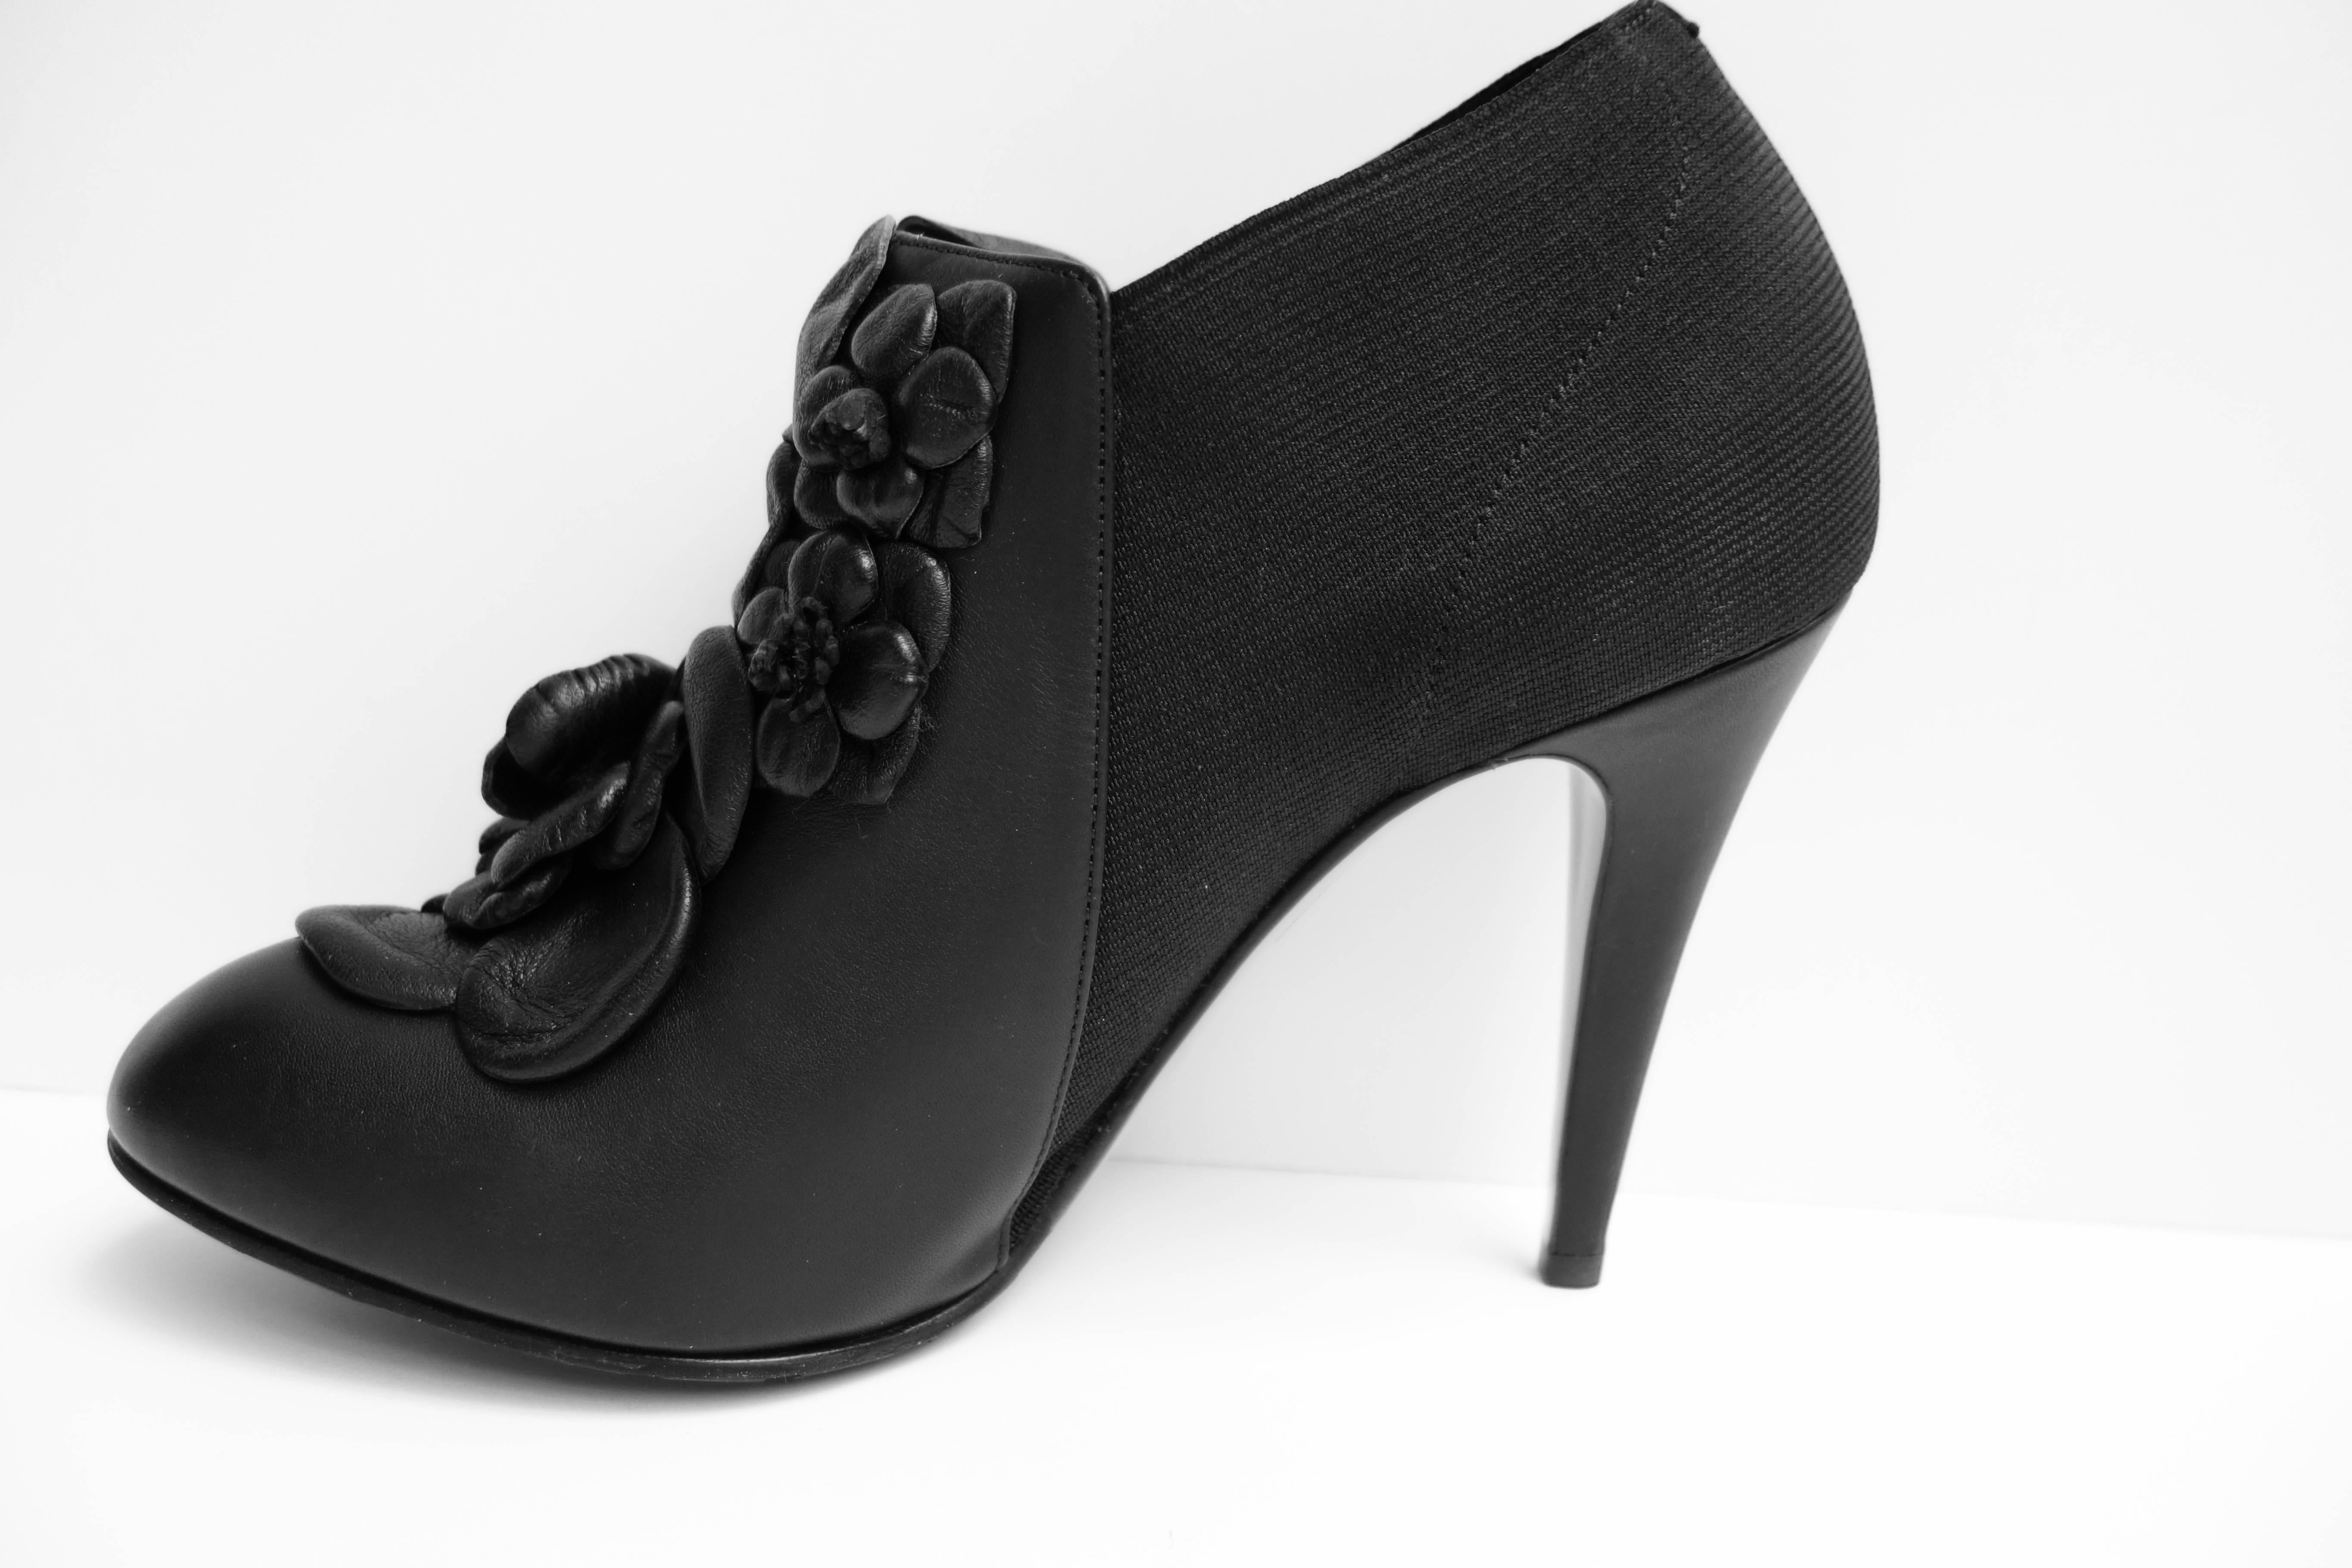 Authentic Valentino Techno Couture Bootie Shoes
Size 39.5 ITA / 9.5 US
Retail: $1,145.00 Sold Out

A distinctively Valentino bouquet of leather roses blossoms on the front of this well-fitting stretch bootie. Intricately detailed,